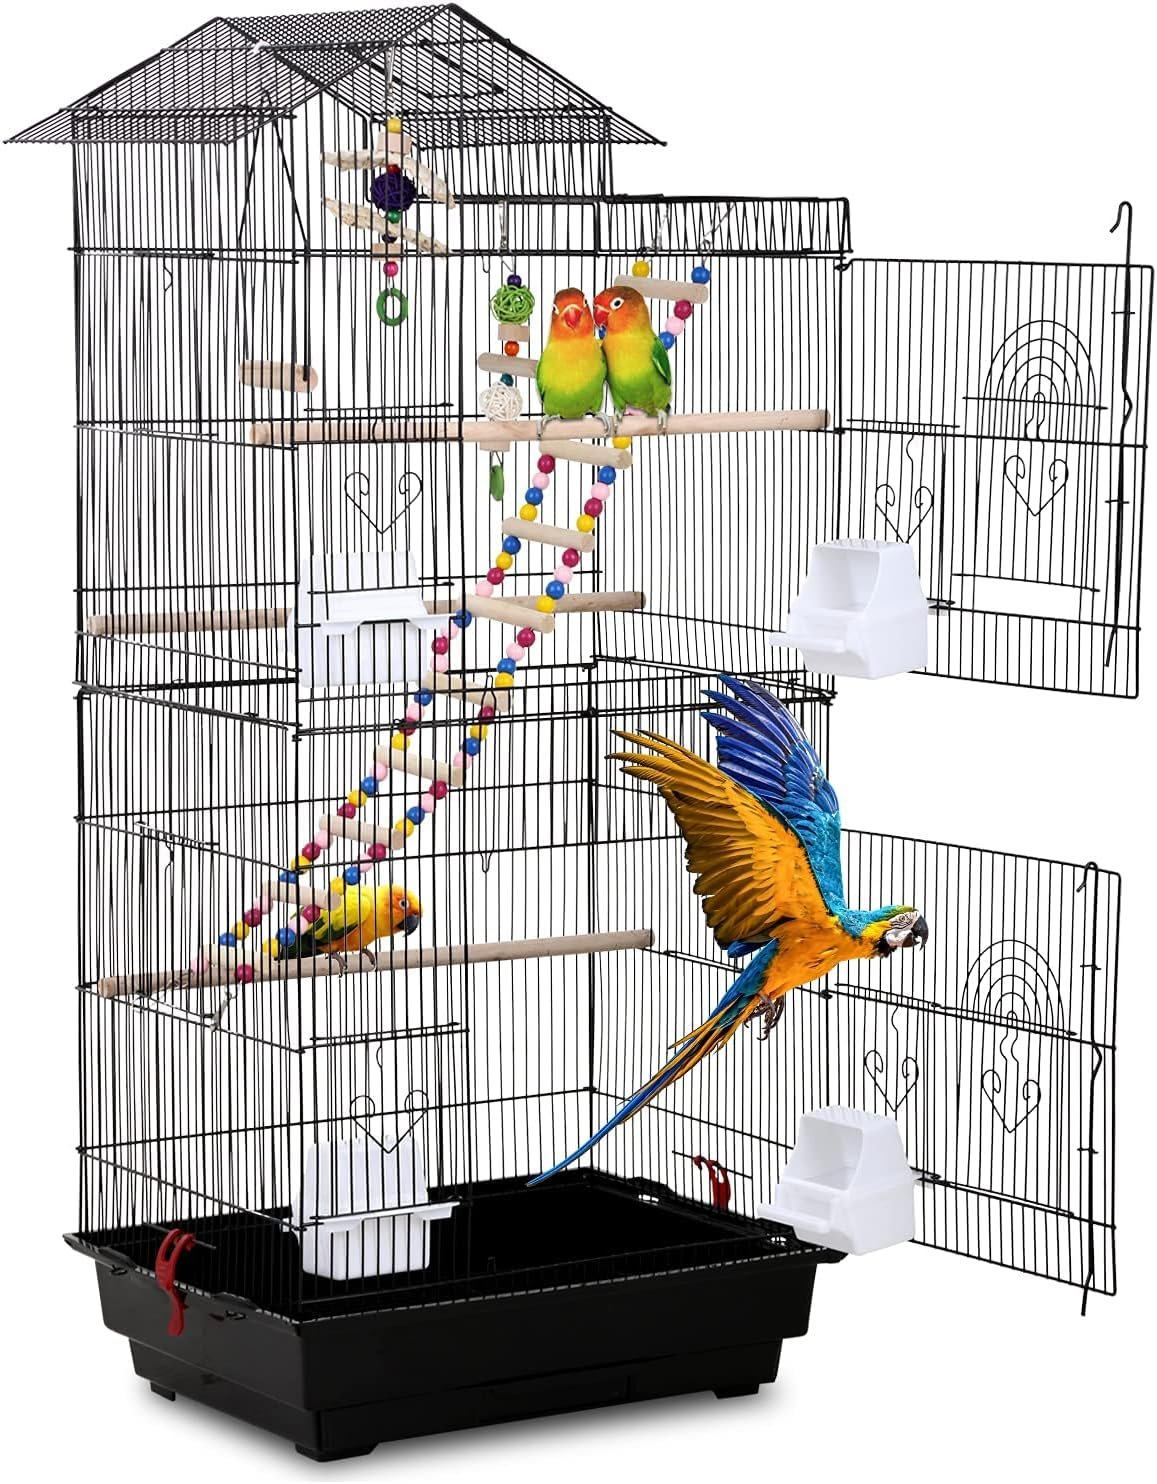 HCY, Bird Cage 39 inch Accessories with Bird Stand Medium Roof Top Large Flight cage for Small Cockatiel Canary Parrot Parakeet Conure Finches Budgie Lovebirds Pet Toy